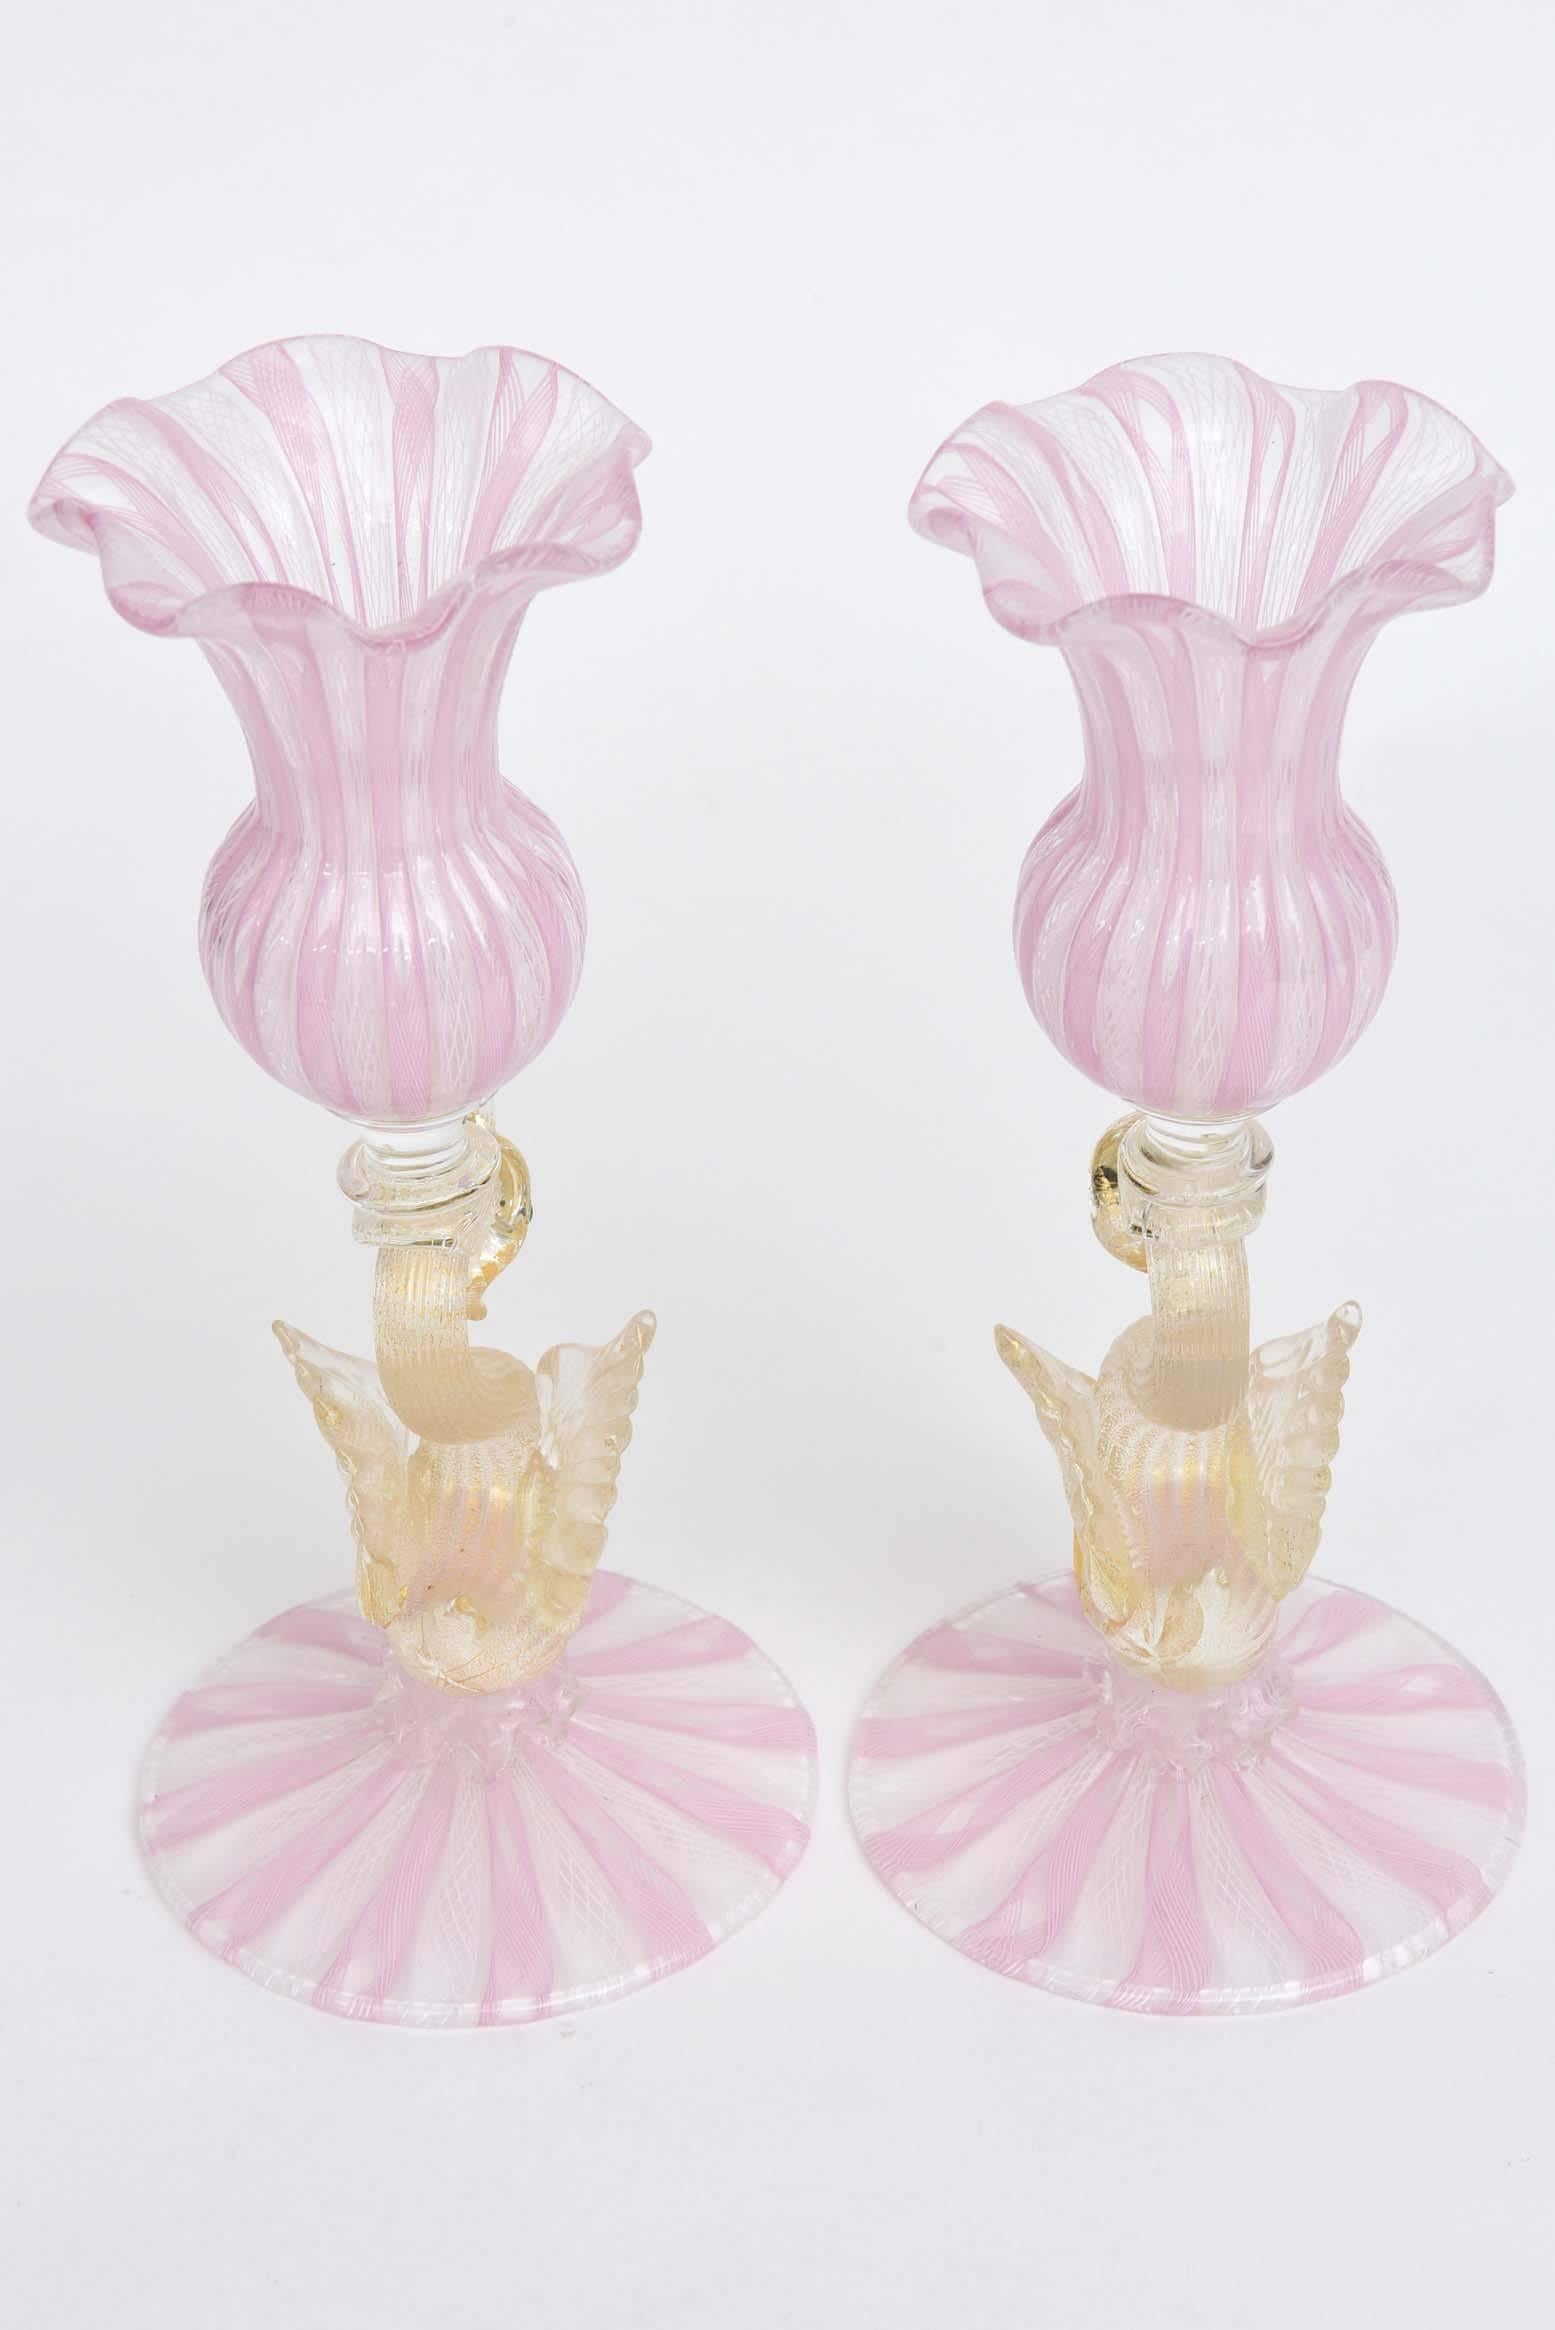 Blown Glass Pair of Venetian Glass Candlesticks, Pink and White Latticino with Figural Swans